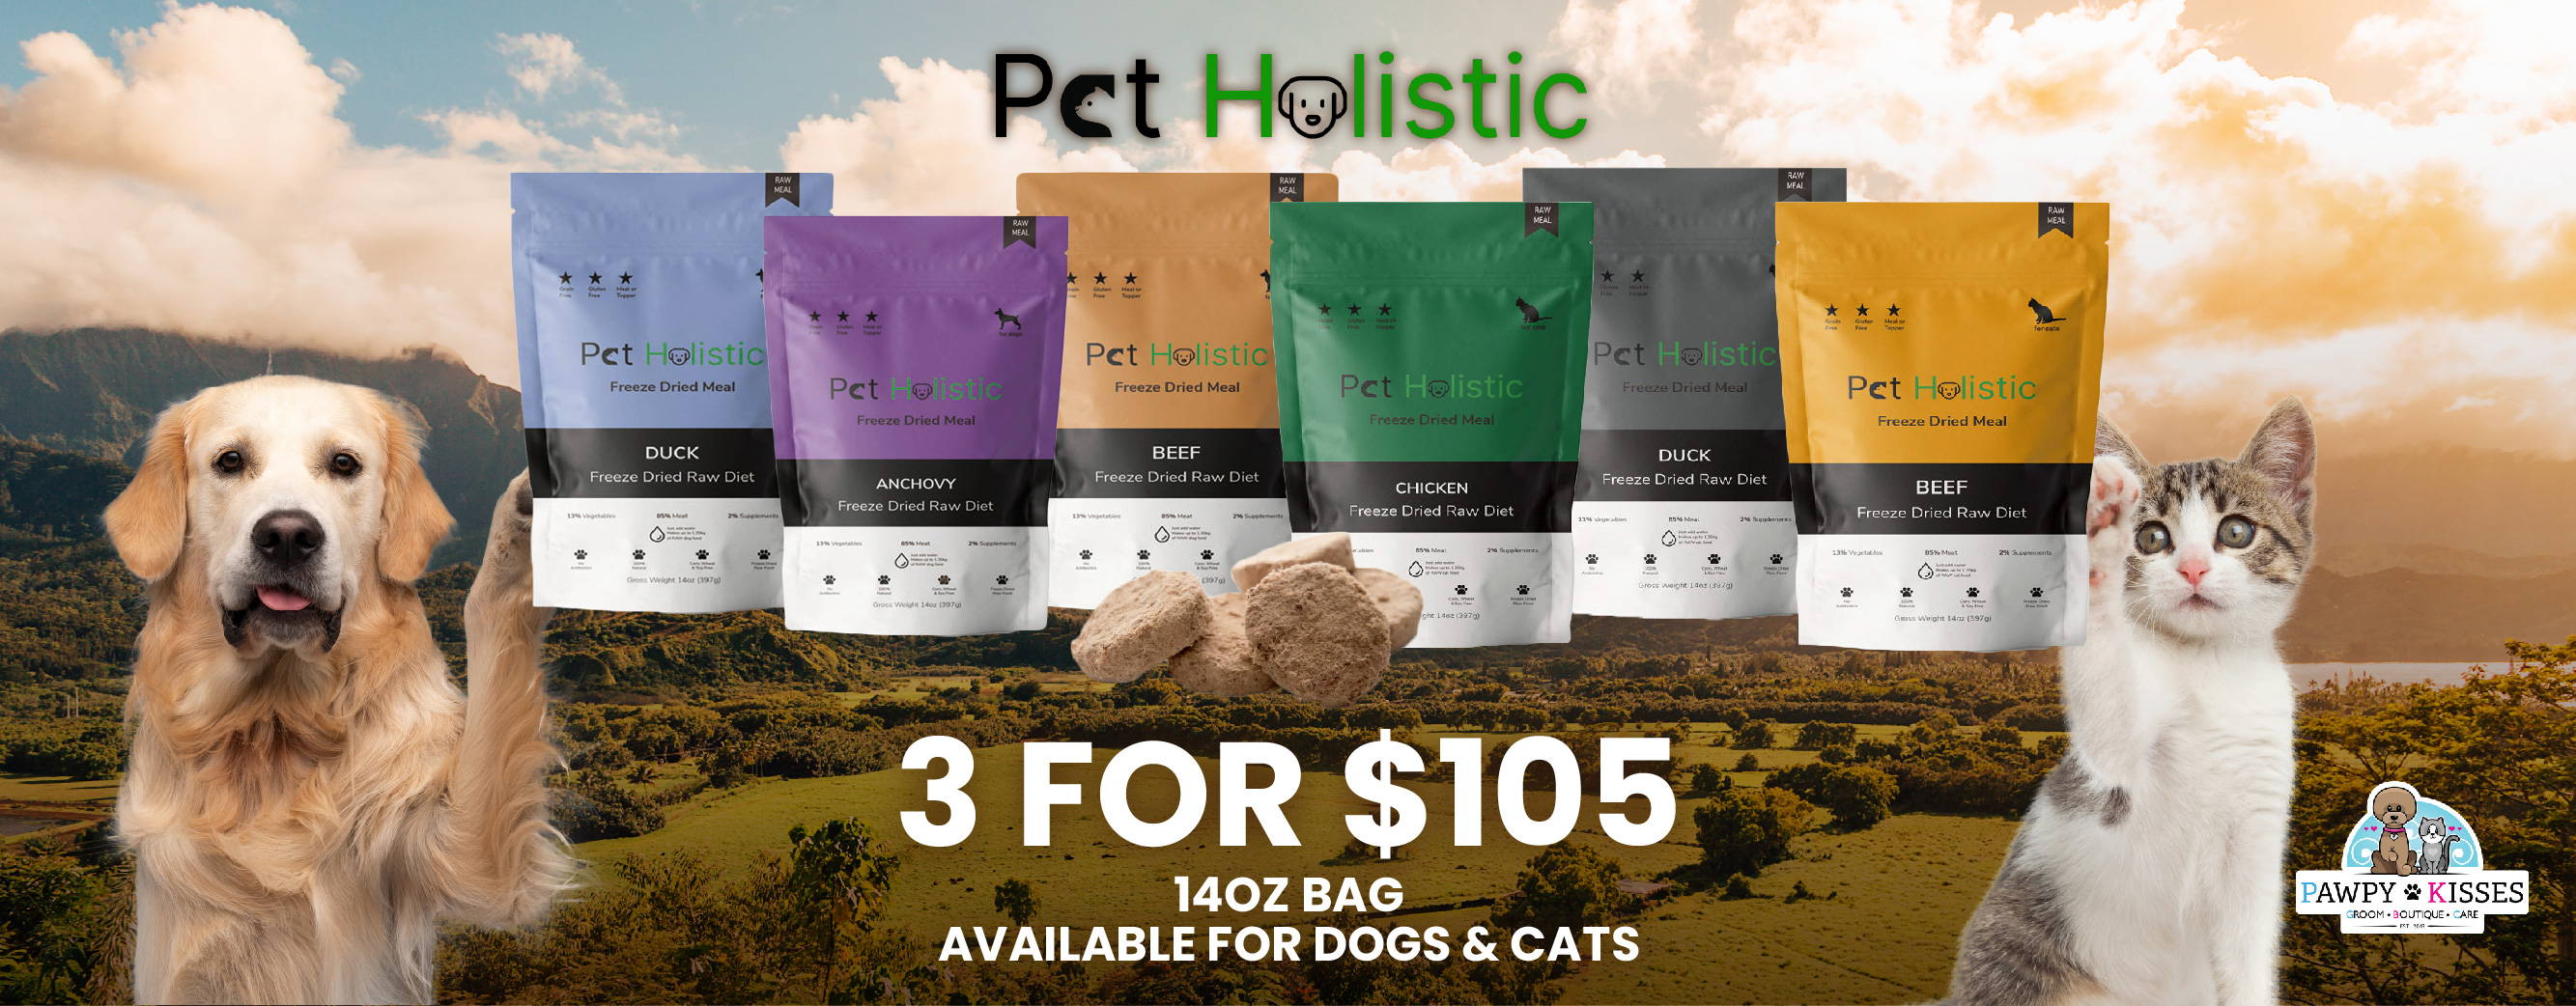 Pet Holistic freeze-dried raw dog & cat food 3 for $105 14oz bags promotion.